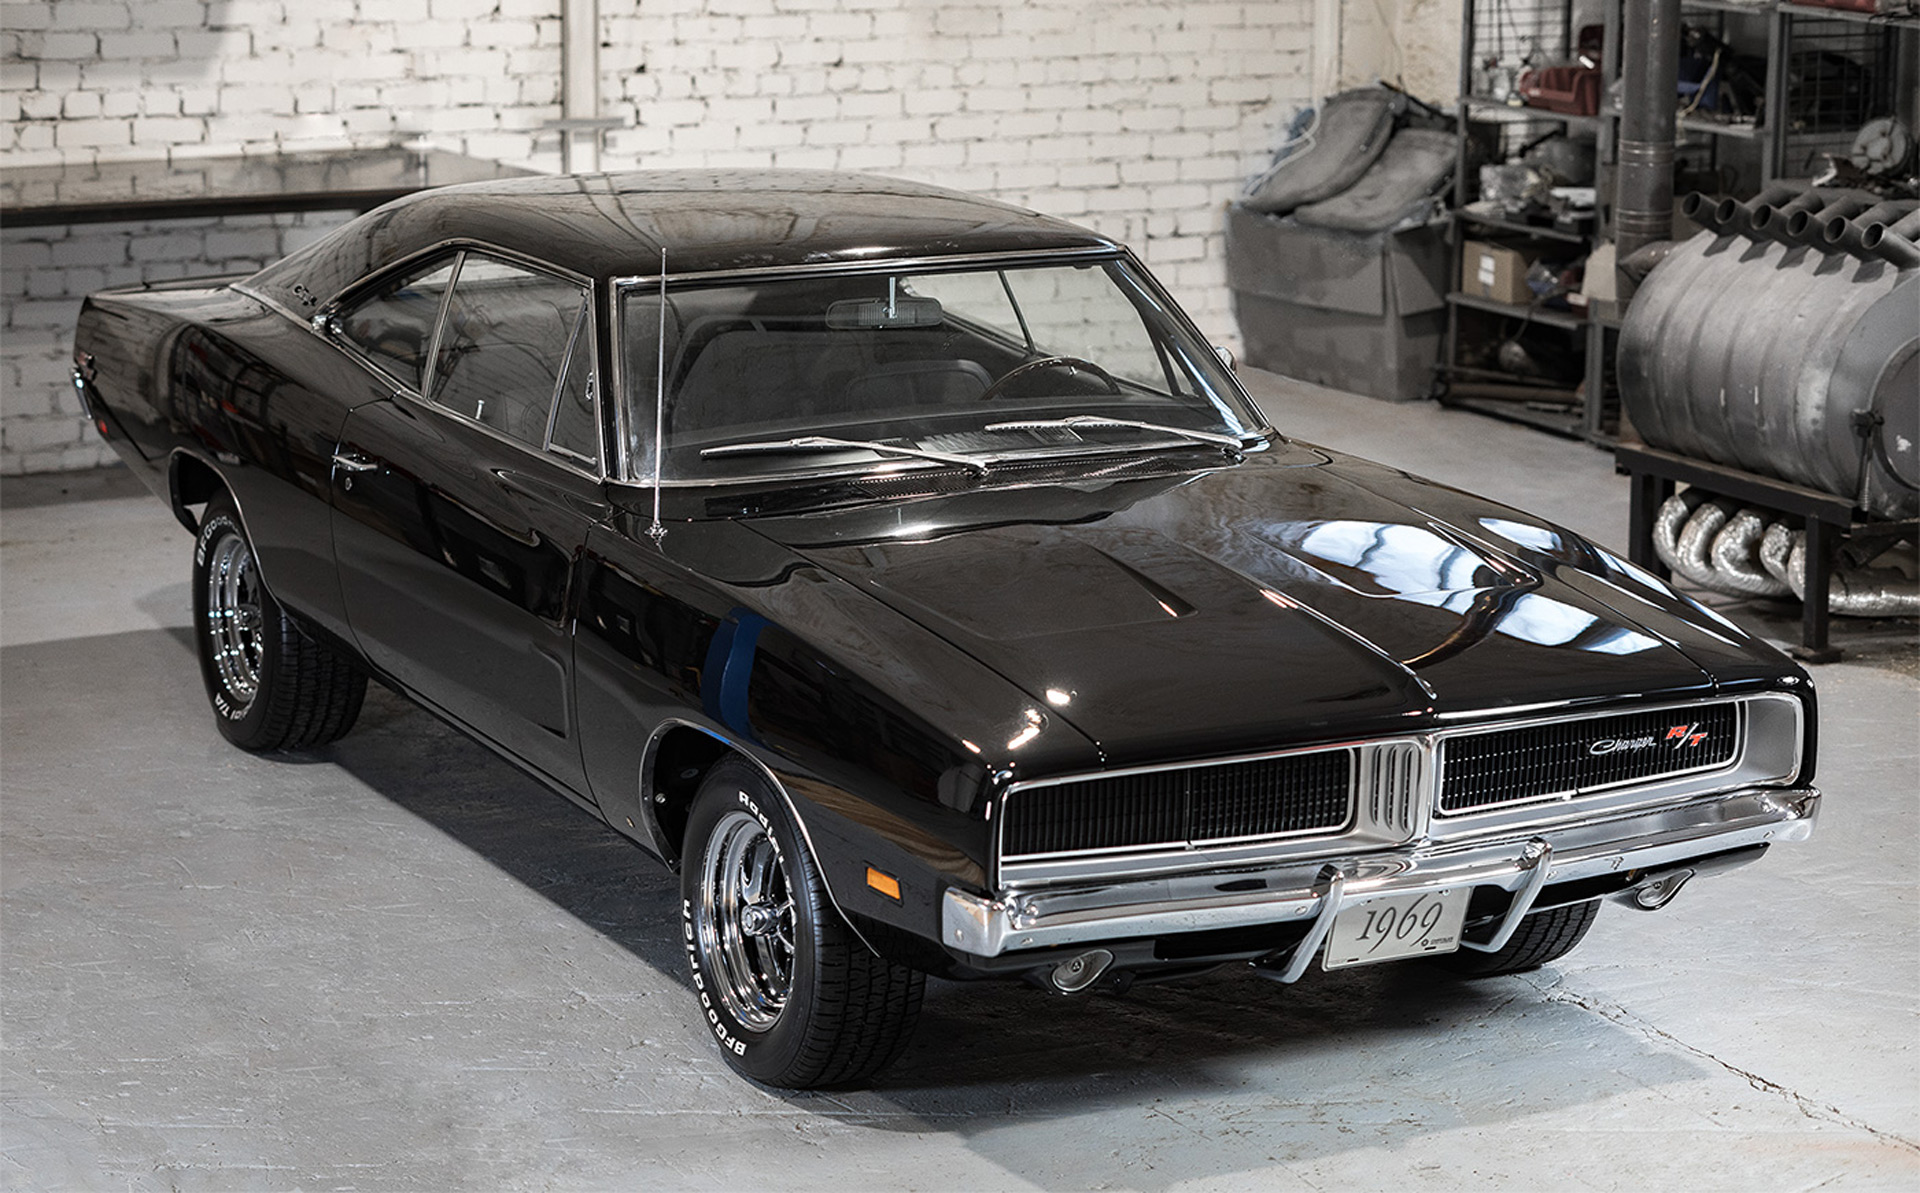 1969 Dodge Charger R/T undergoes an immaculate restoration